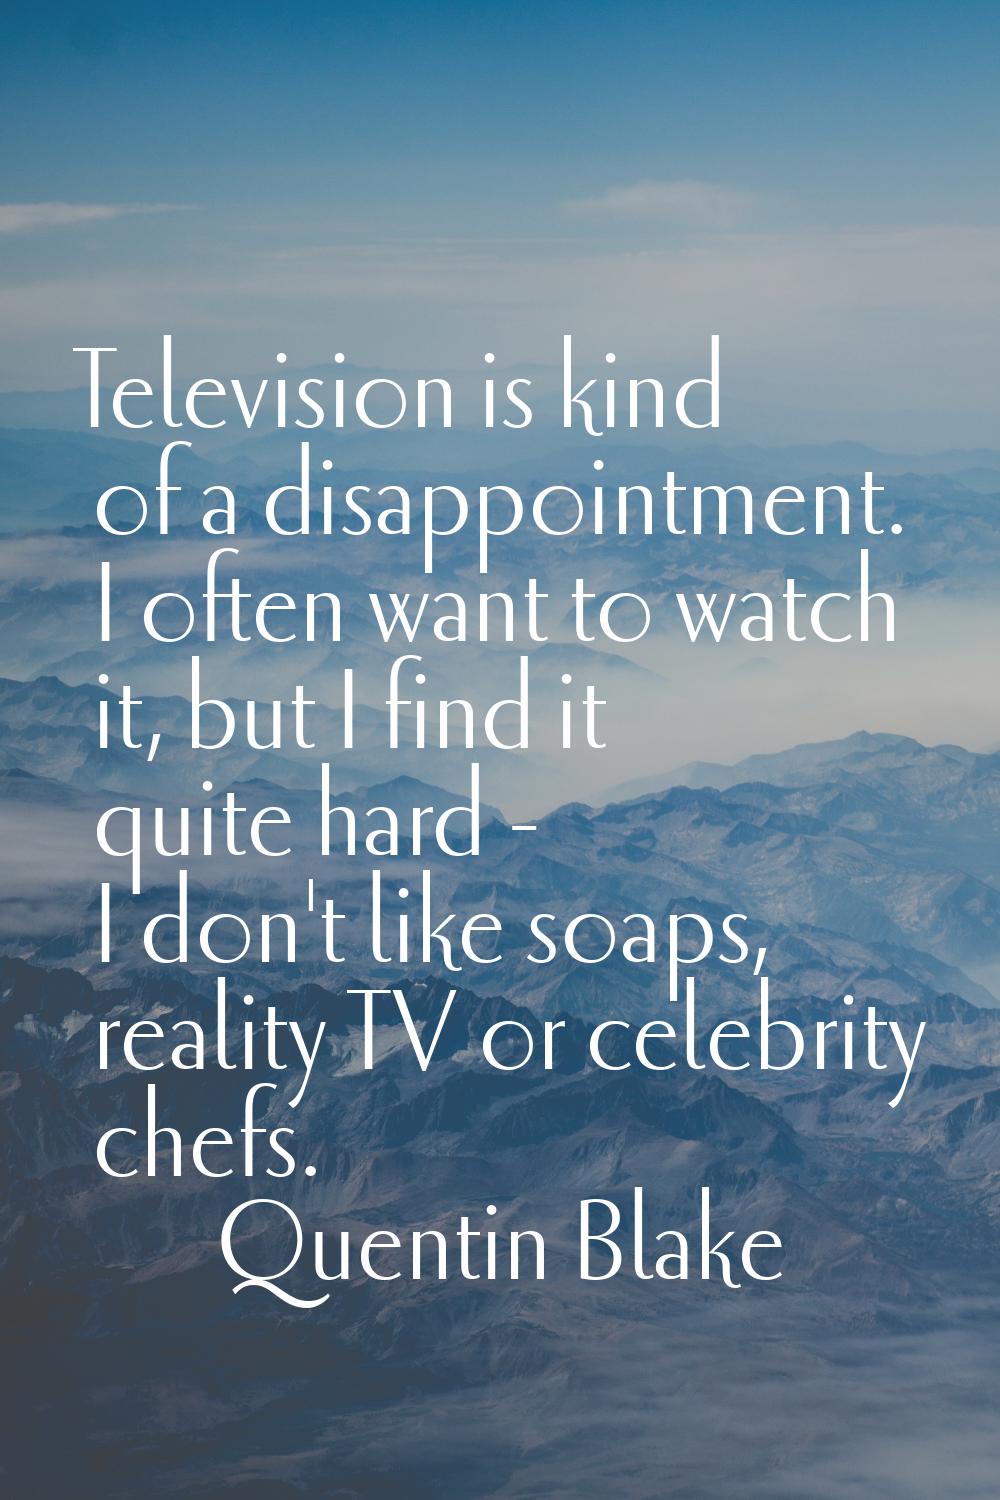 Television is kind of a disappointment. I often want to watch it, but I find it quite hard - I don'